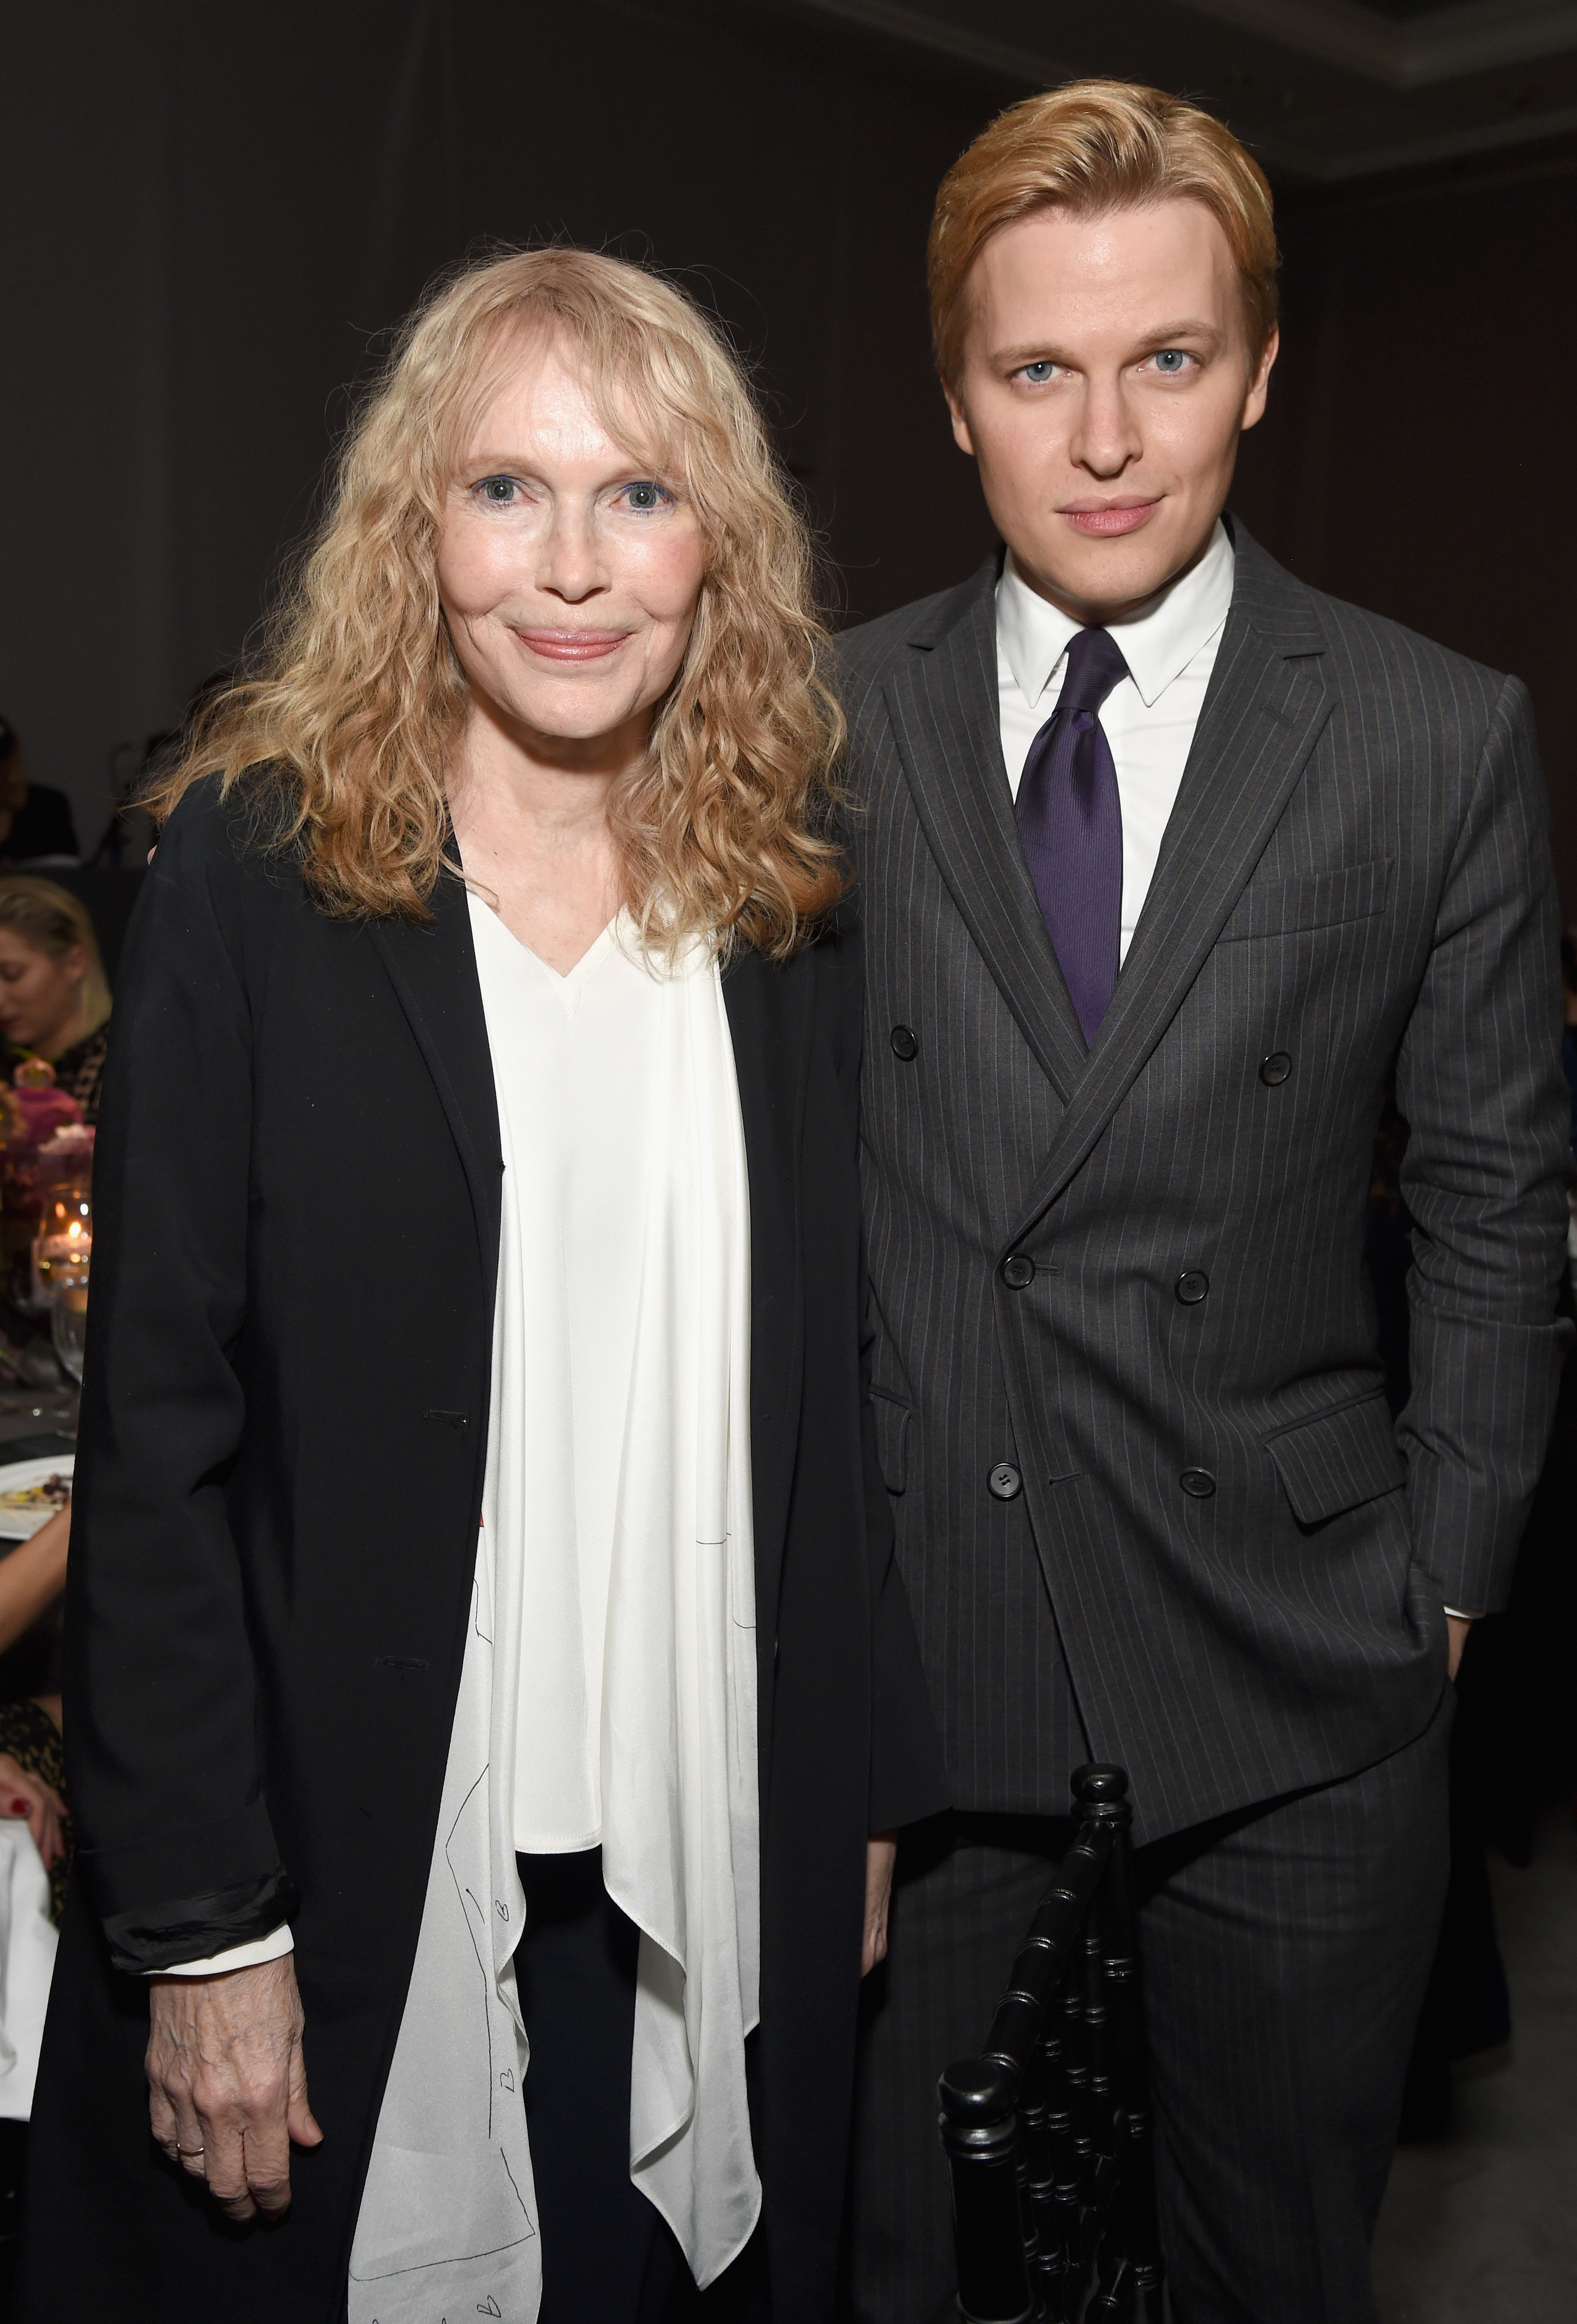 Mia Farrow and Ronan Farrow are pictured at Elle&#x27;s 25th Annual Women In Hollywood Celebration event on October 15, 2018